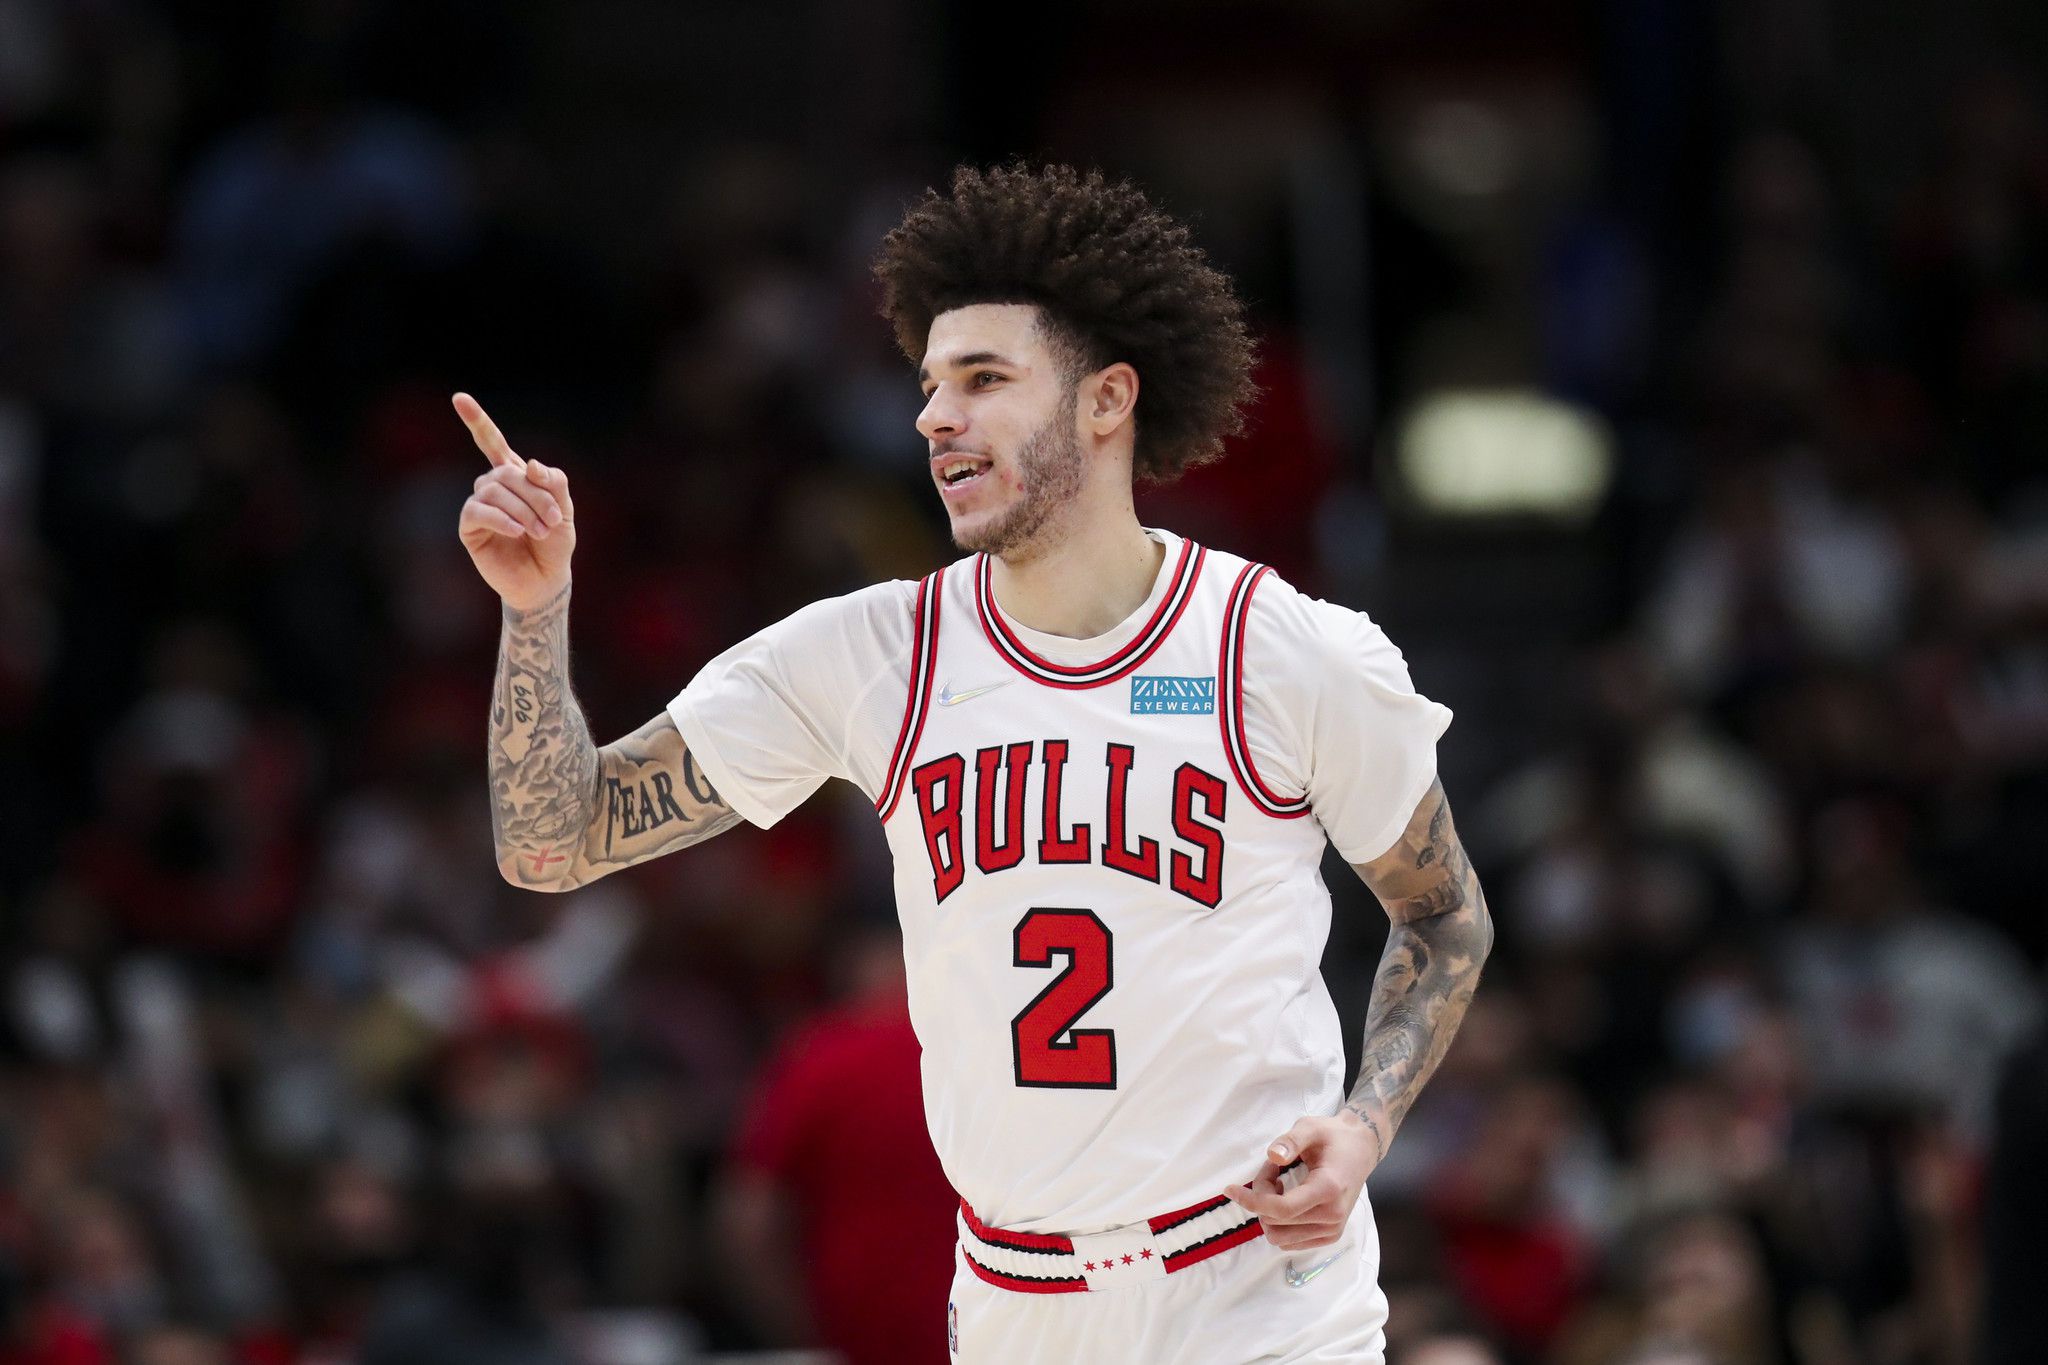 Chicago Bulls guard Lonzo Ball smiles after making a three-point-shot during the second half against the Detroit Pistons at the United Center on Jan. 11, 2022.